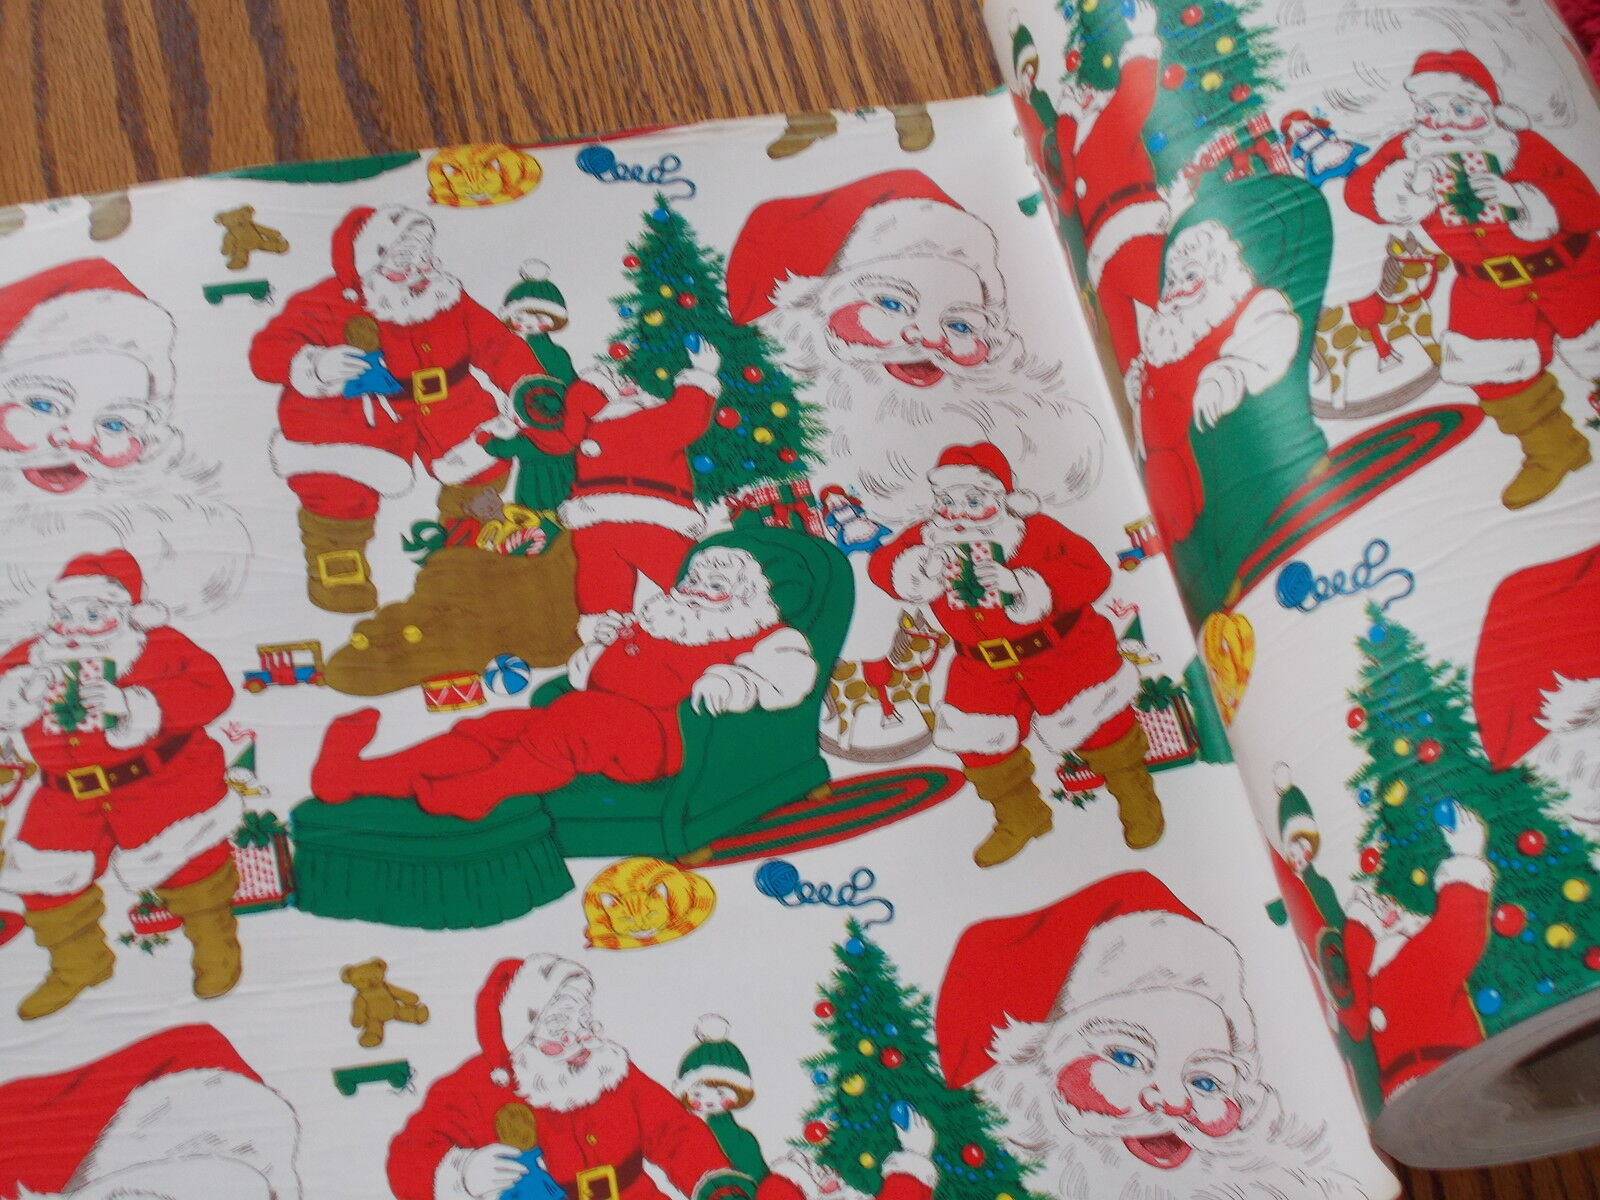 VTG CHRISTMAS DEPT. STORE WRAPPING PAPER 2 YARDS GIFT WRAP SANTA CLAUS POST WW2